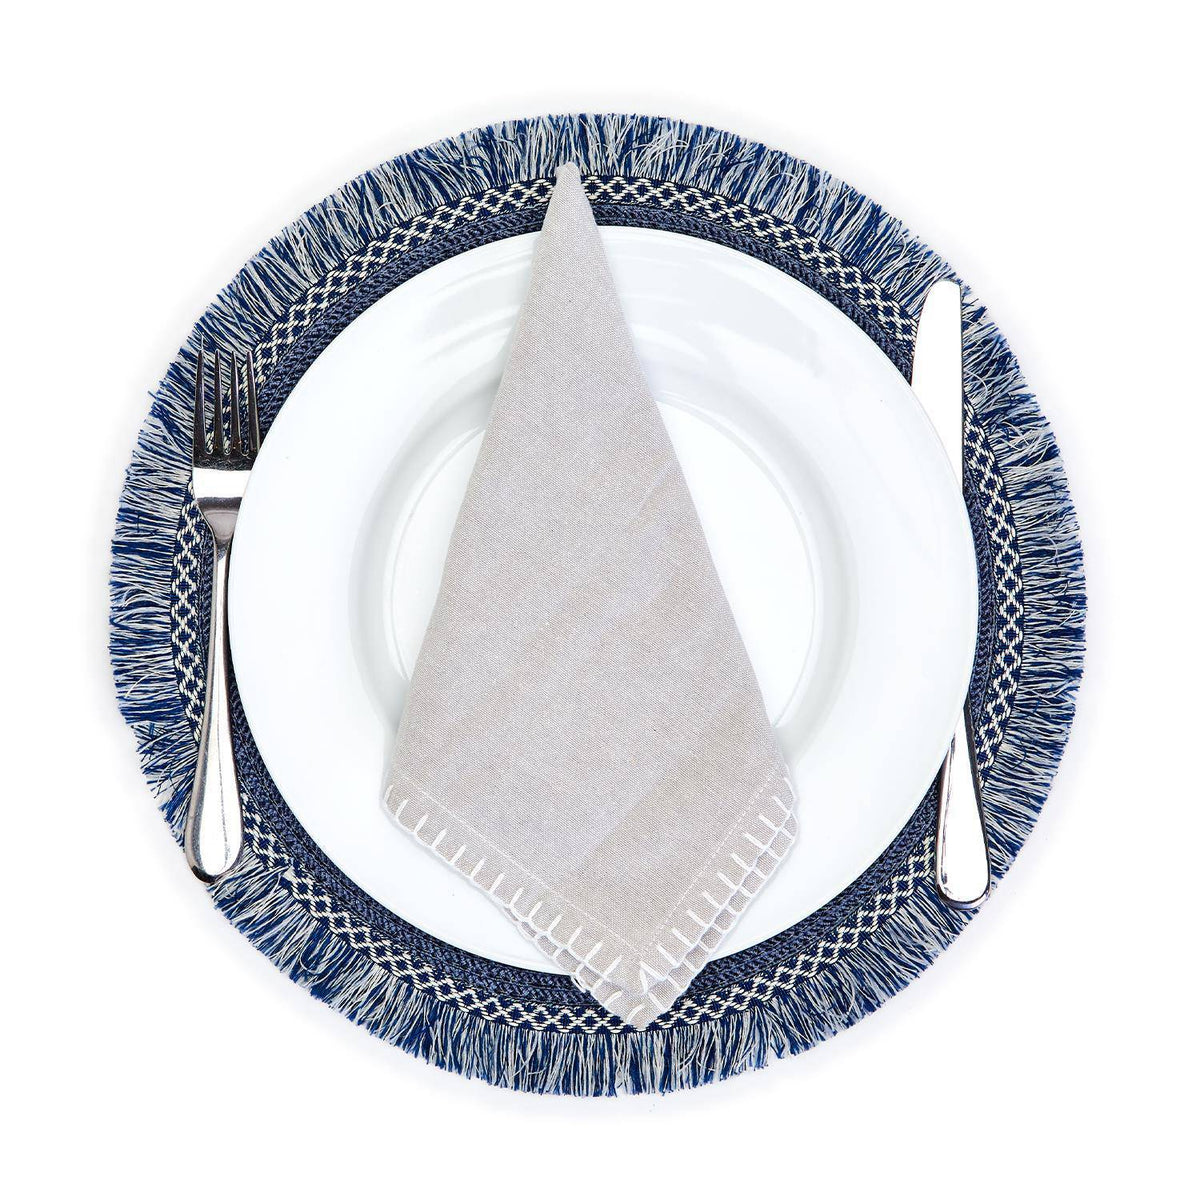 Blue Set of 4 Fringed Placemats - The Preppy Bunny